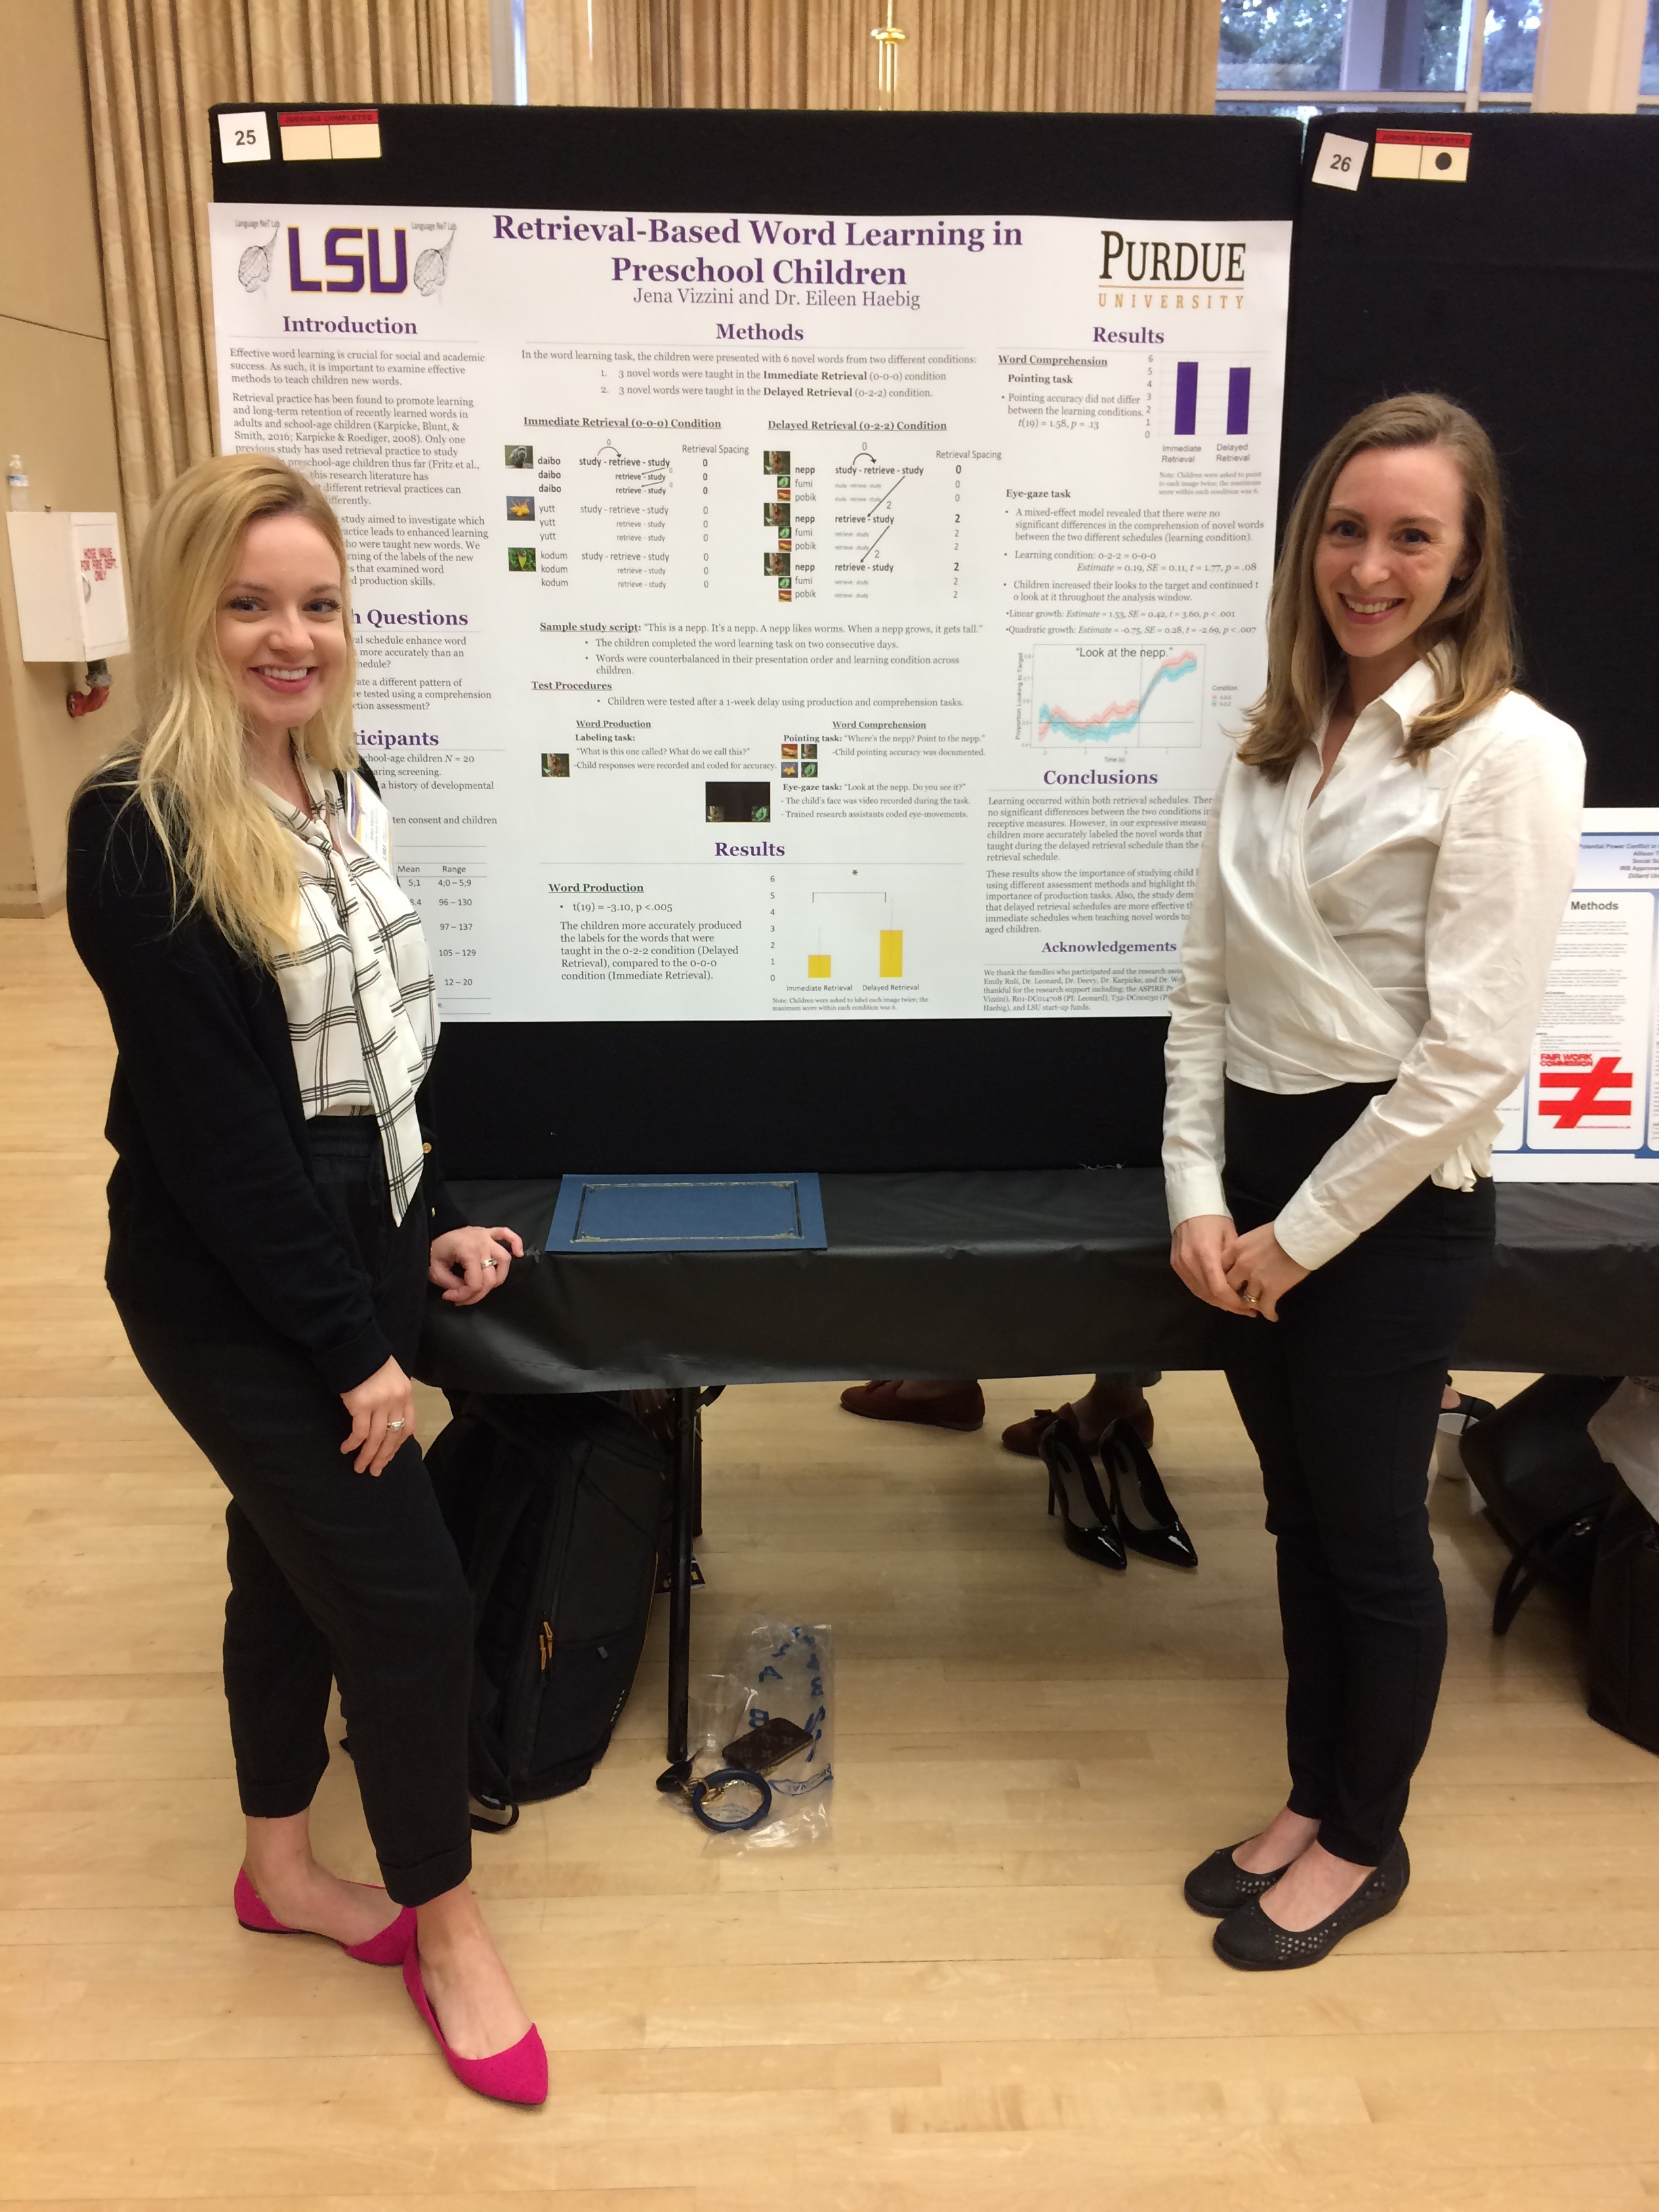 Jena and Dr. Haebig presenting research at the undergraduate research symposium